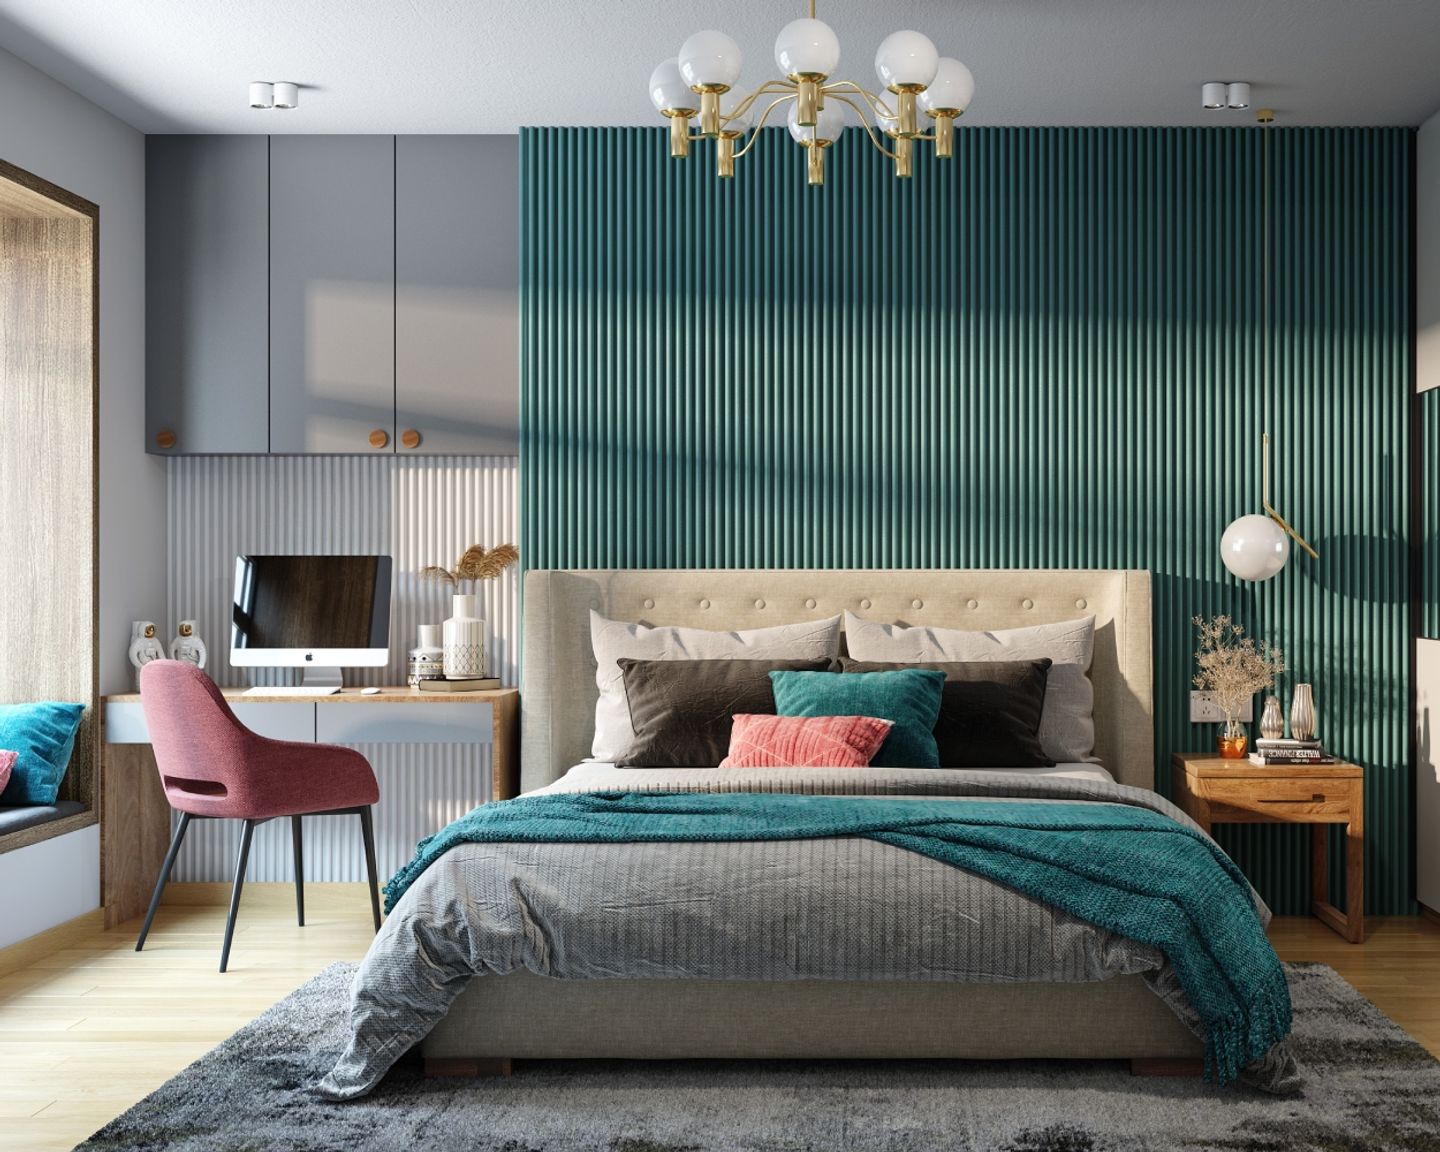 Teal Blue And White Fluted Wall Panel Wall Design - Livspace